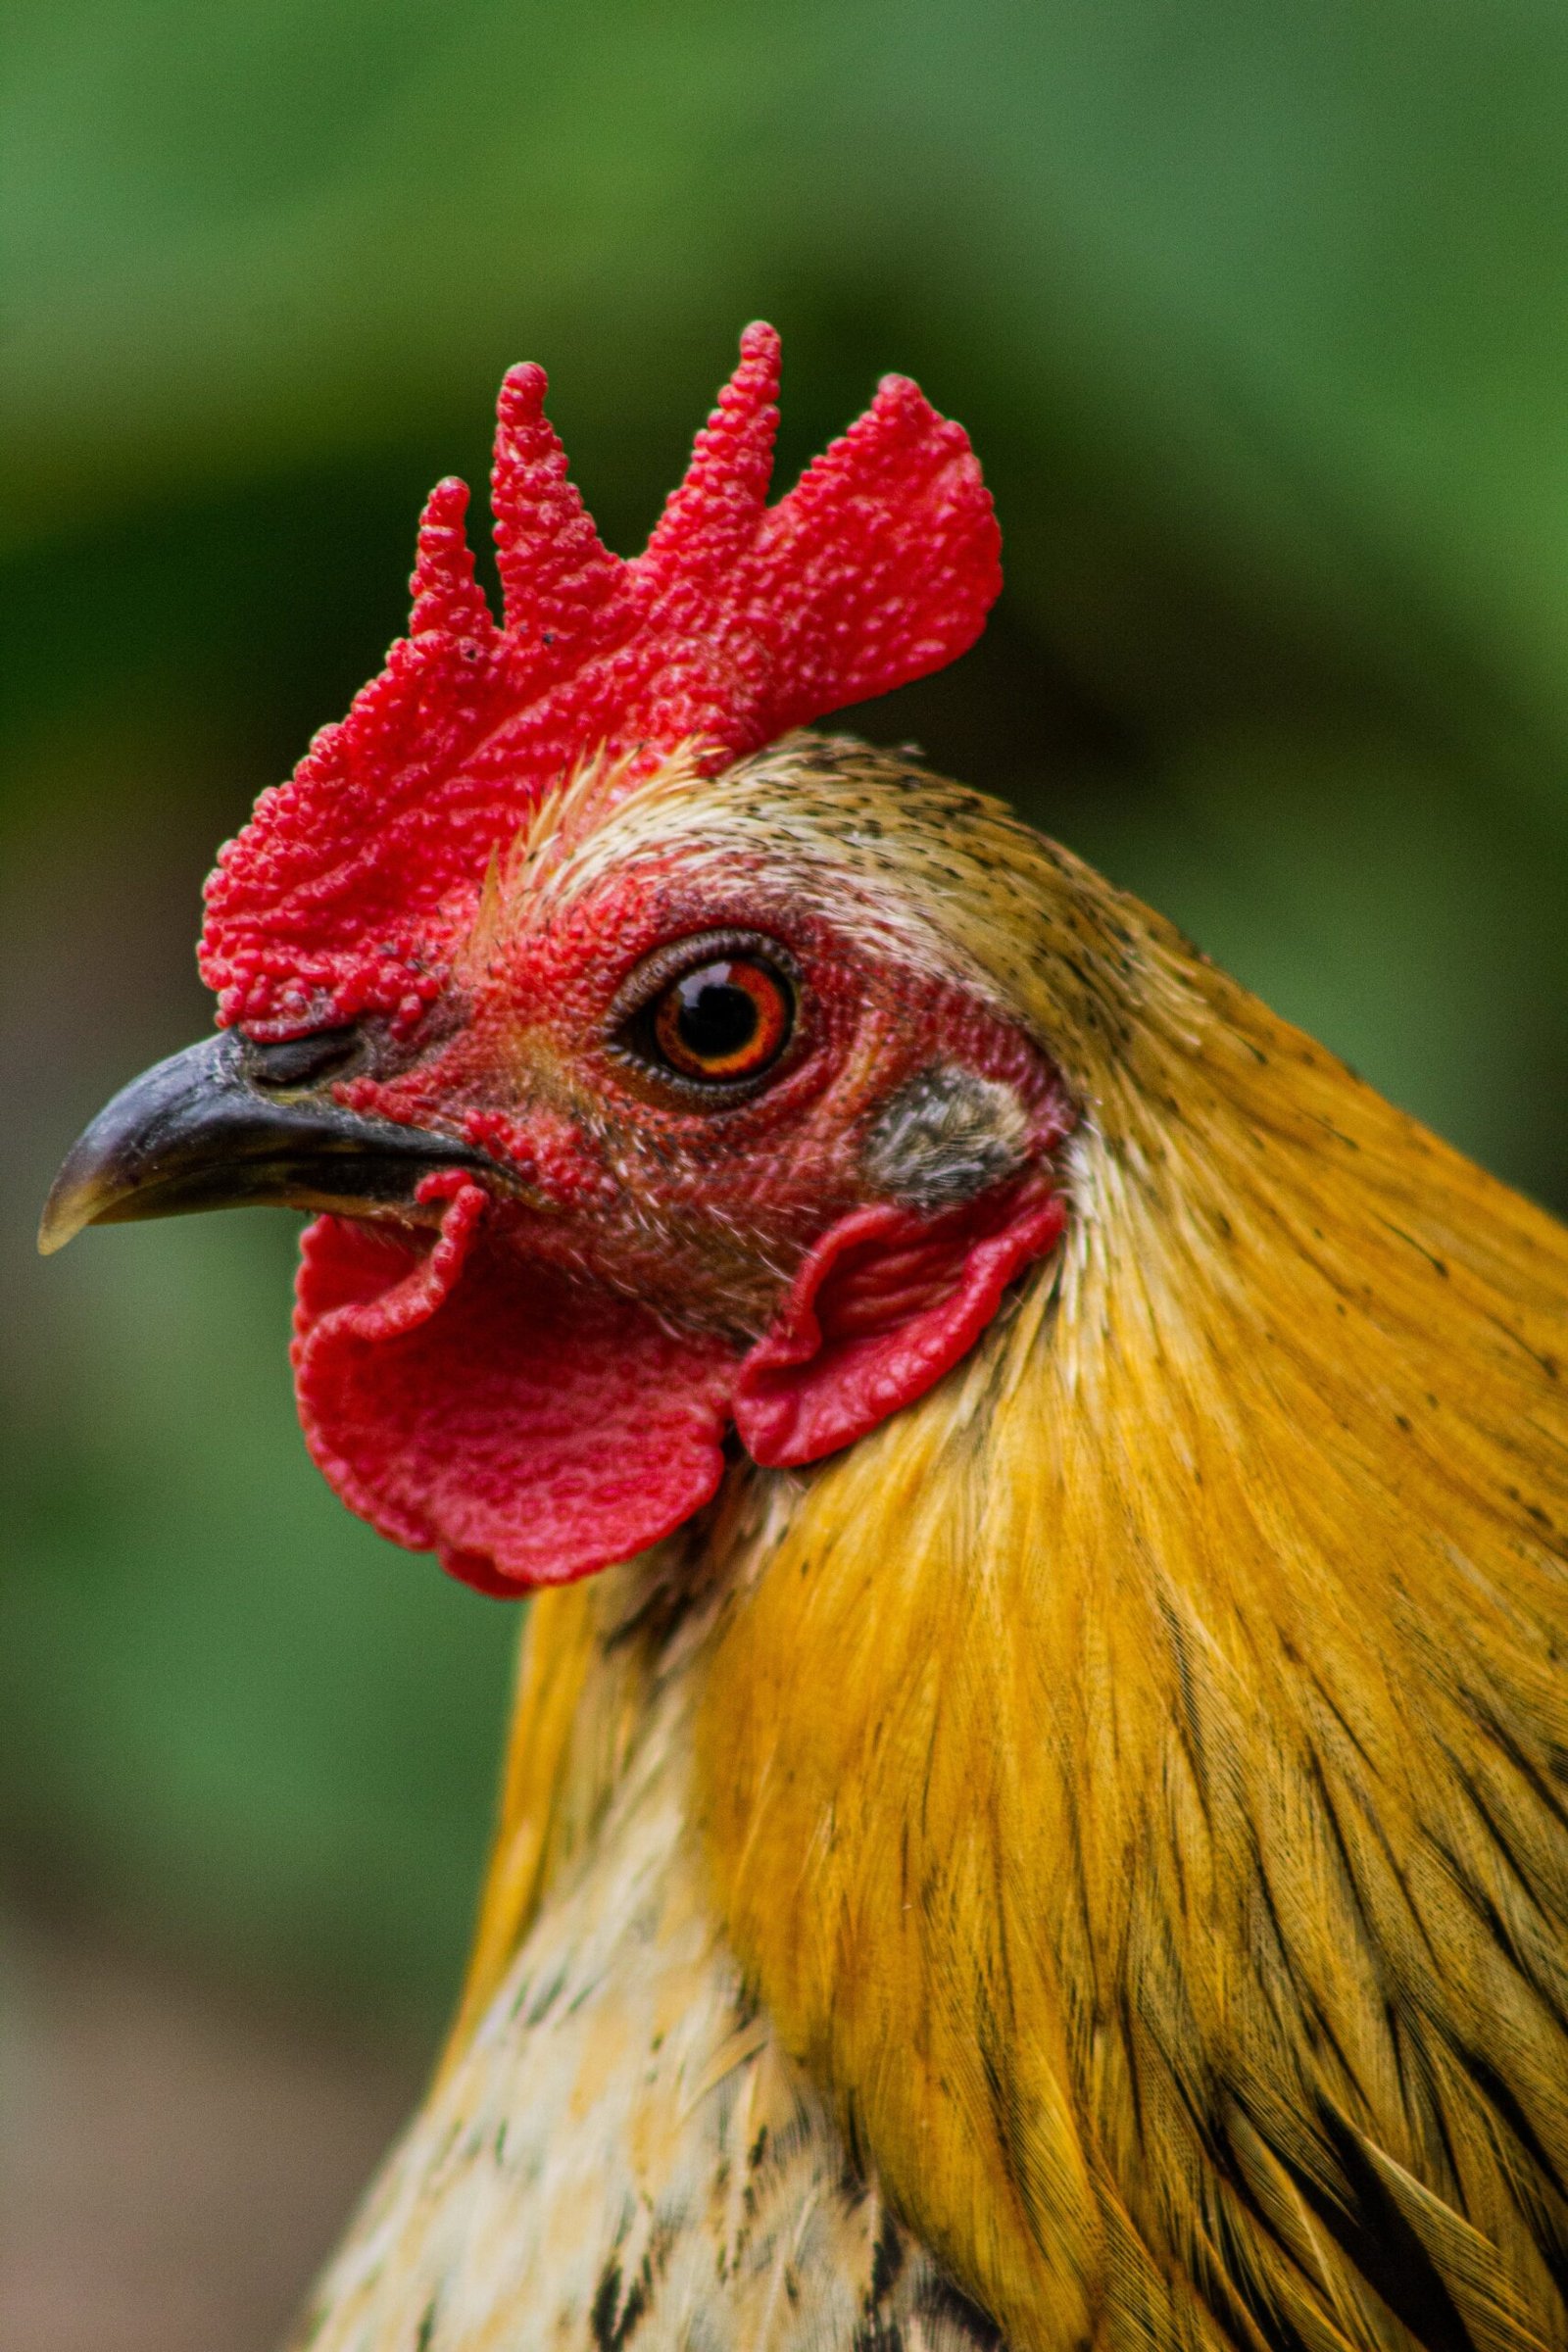 Whats The Best Way To Protect Chickens From Bacterial Infections?